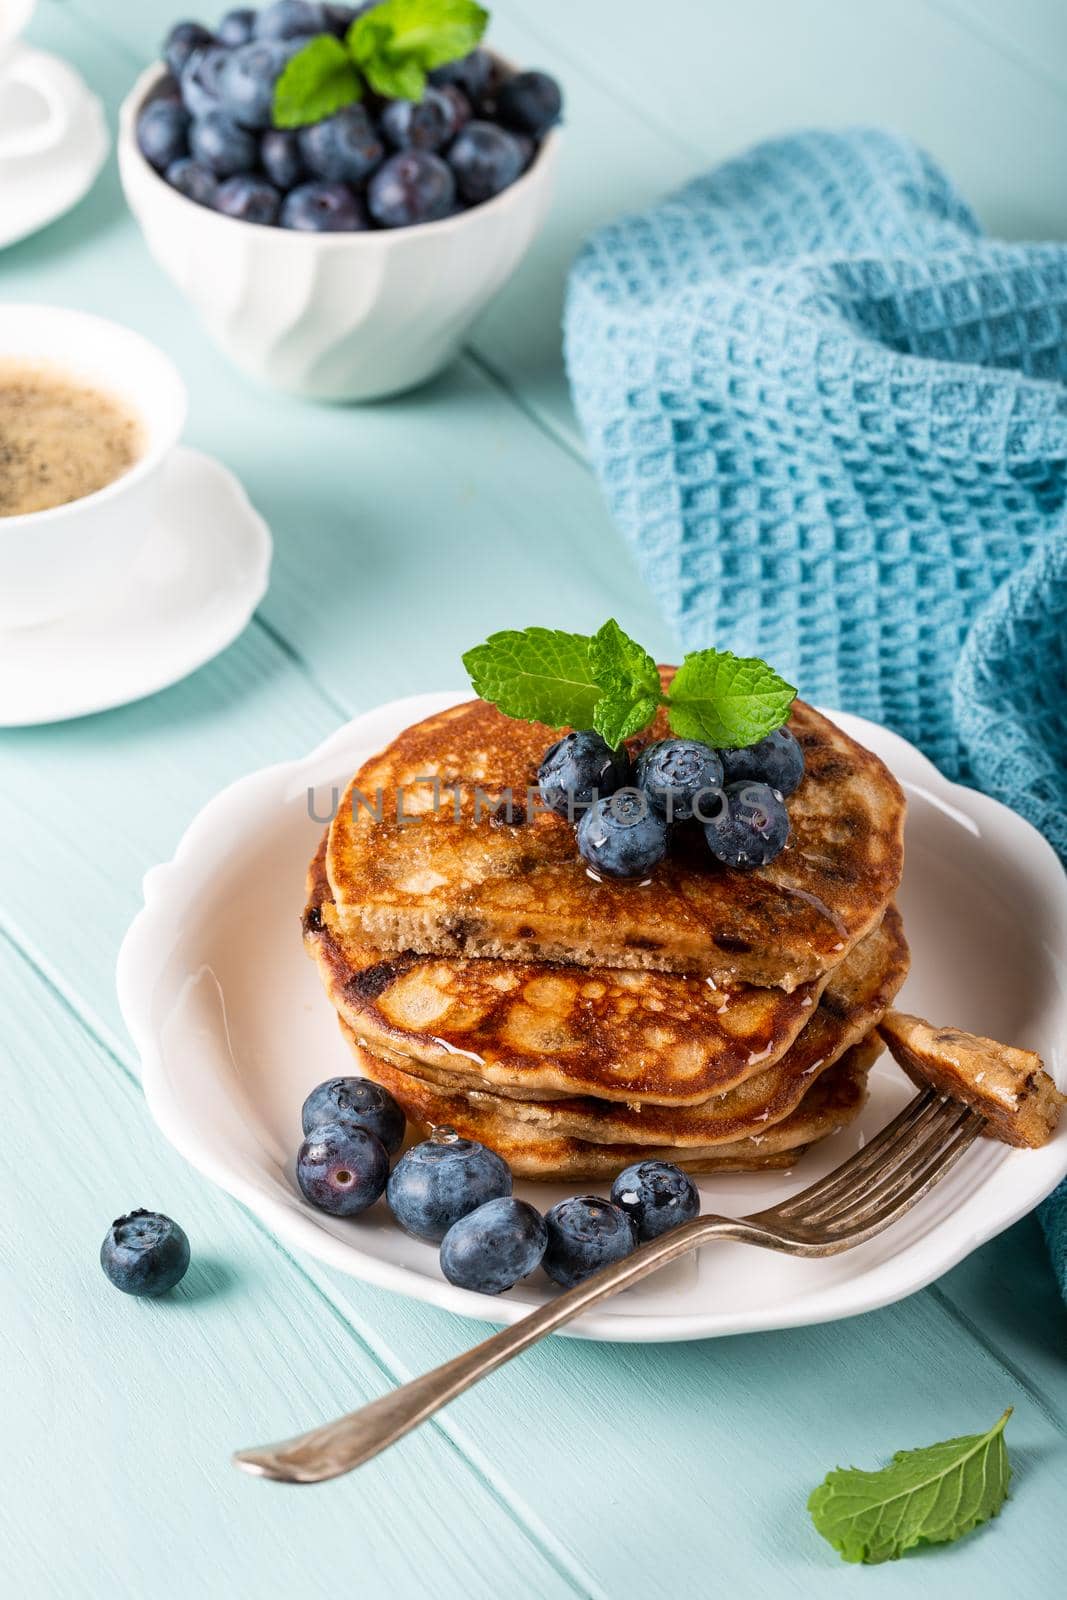 Delicious pancakes with chocolate drops, honey and blueberries. Healthy breakfast concept.